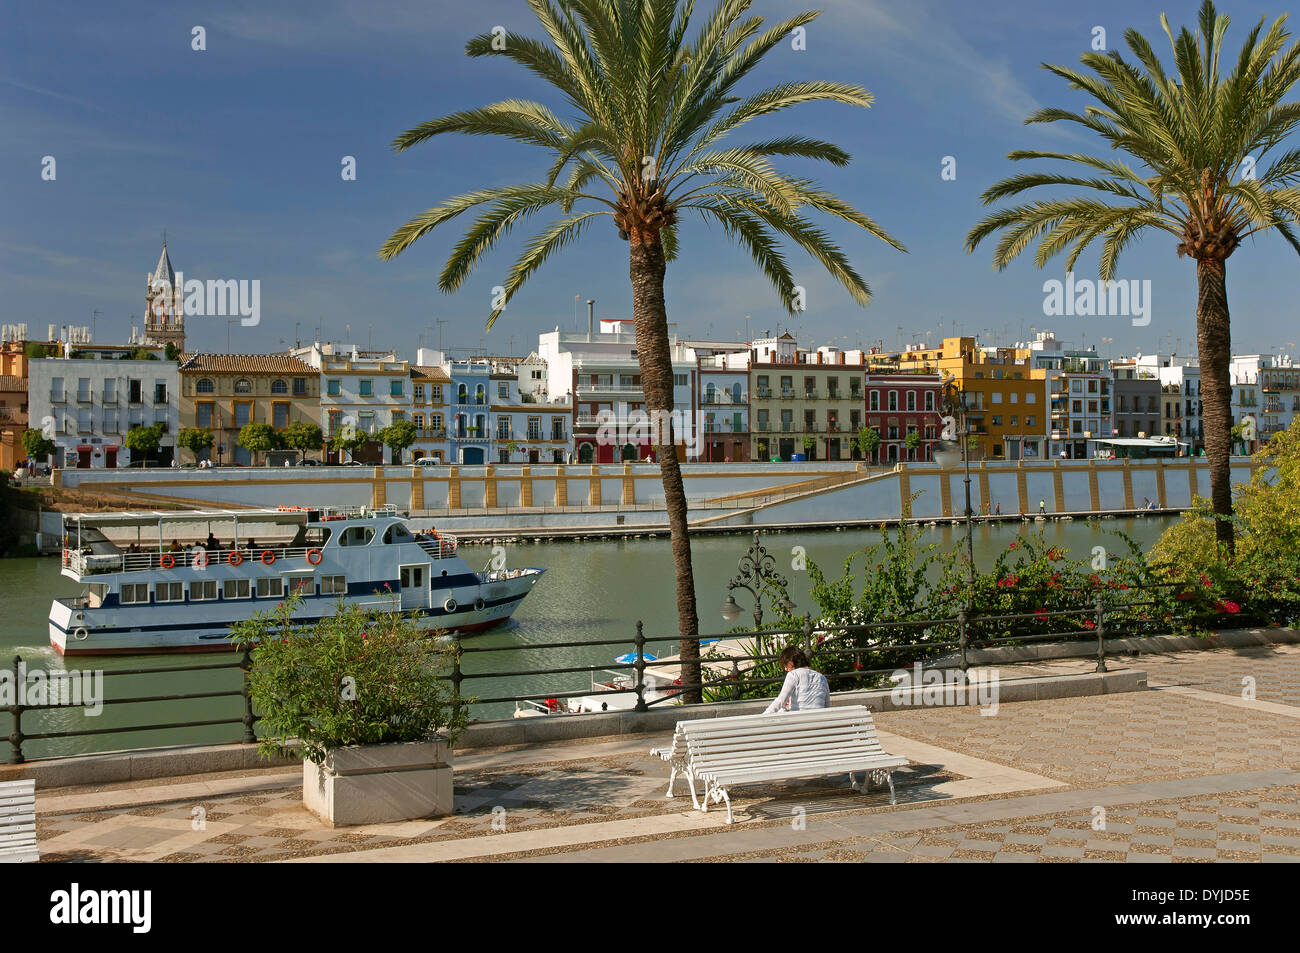 Sightseeing cruise on the river Guadalquivir and Triana district, Seville, Region of Andalusia, Spain, Europe Stock Photo